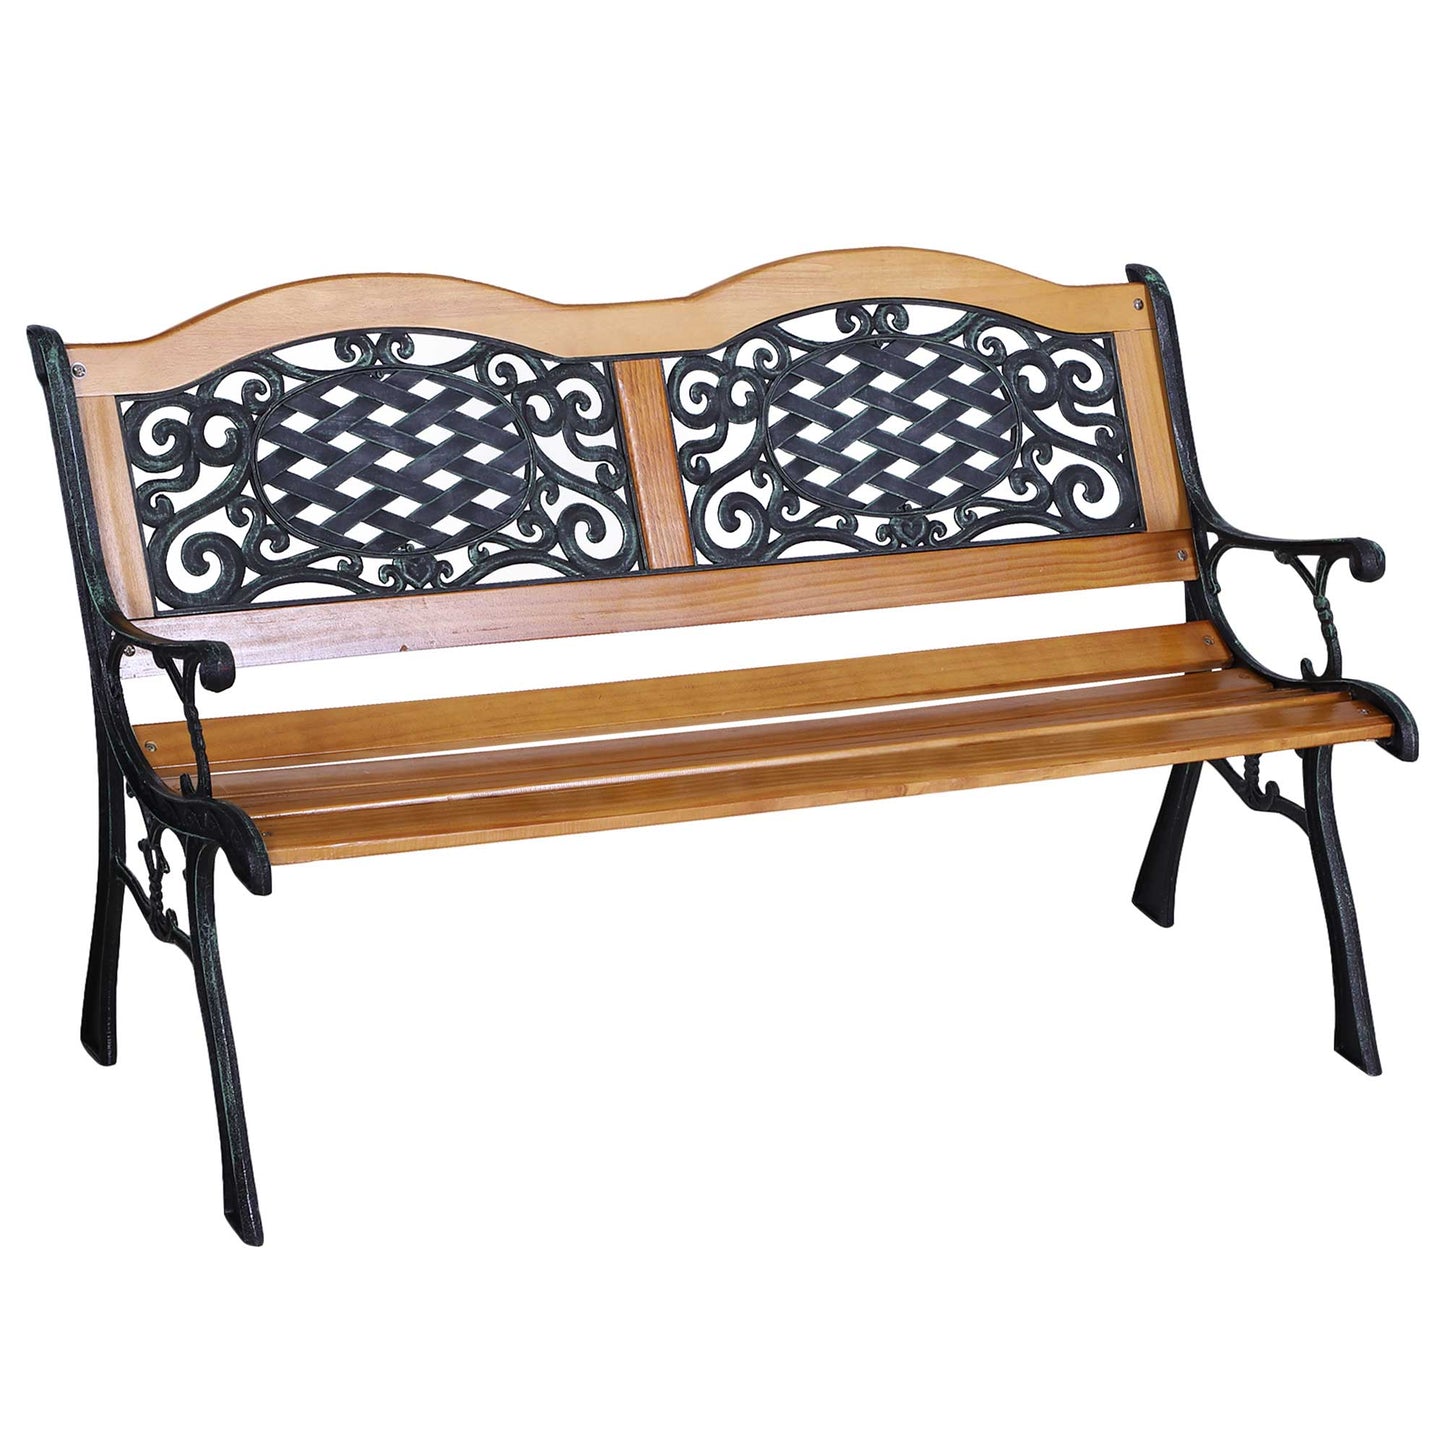 Outdoor and Garden-49.5" Garden Bench Outdoor Loveseat with Cast Steel Legs Antique Armrest and Backrest for Patio, Deck, and Yard - Outdoor Style Company